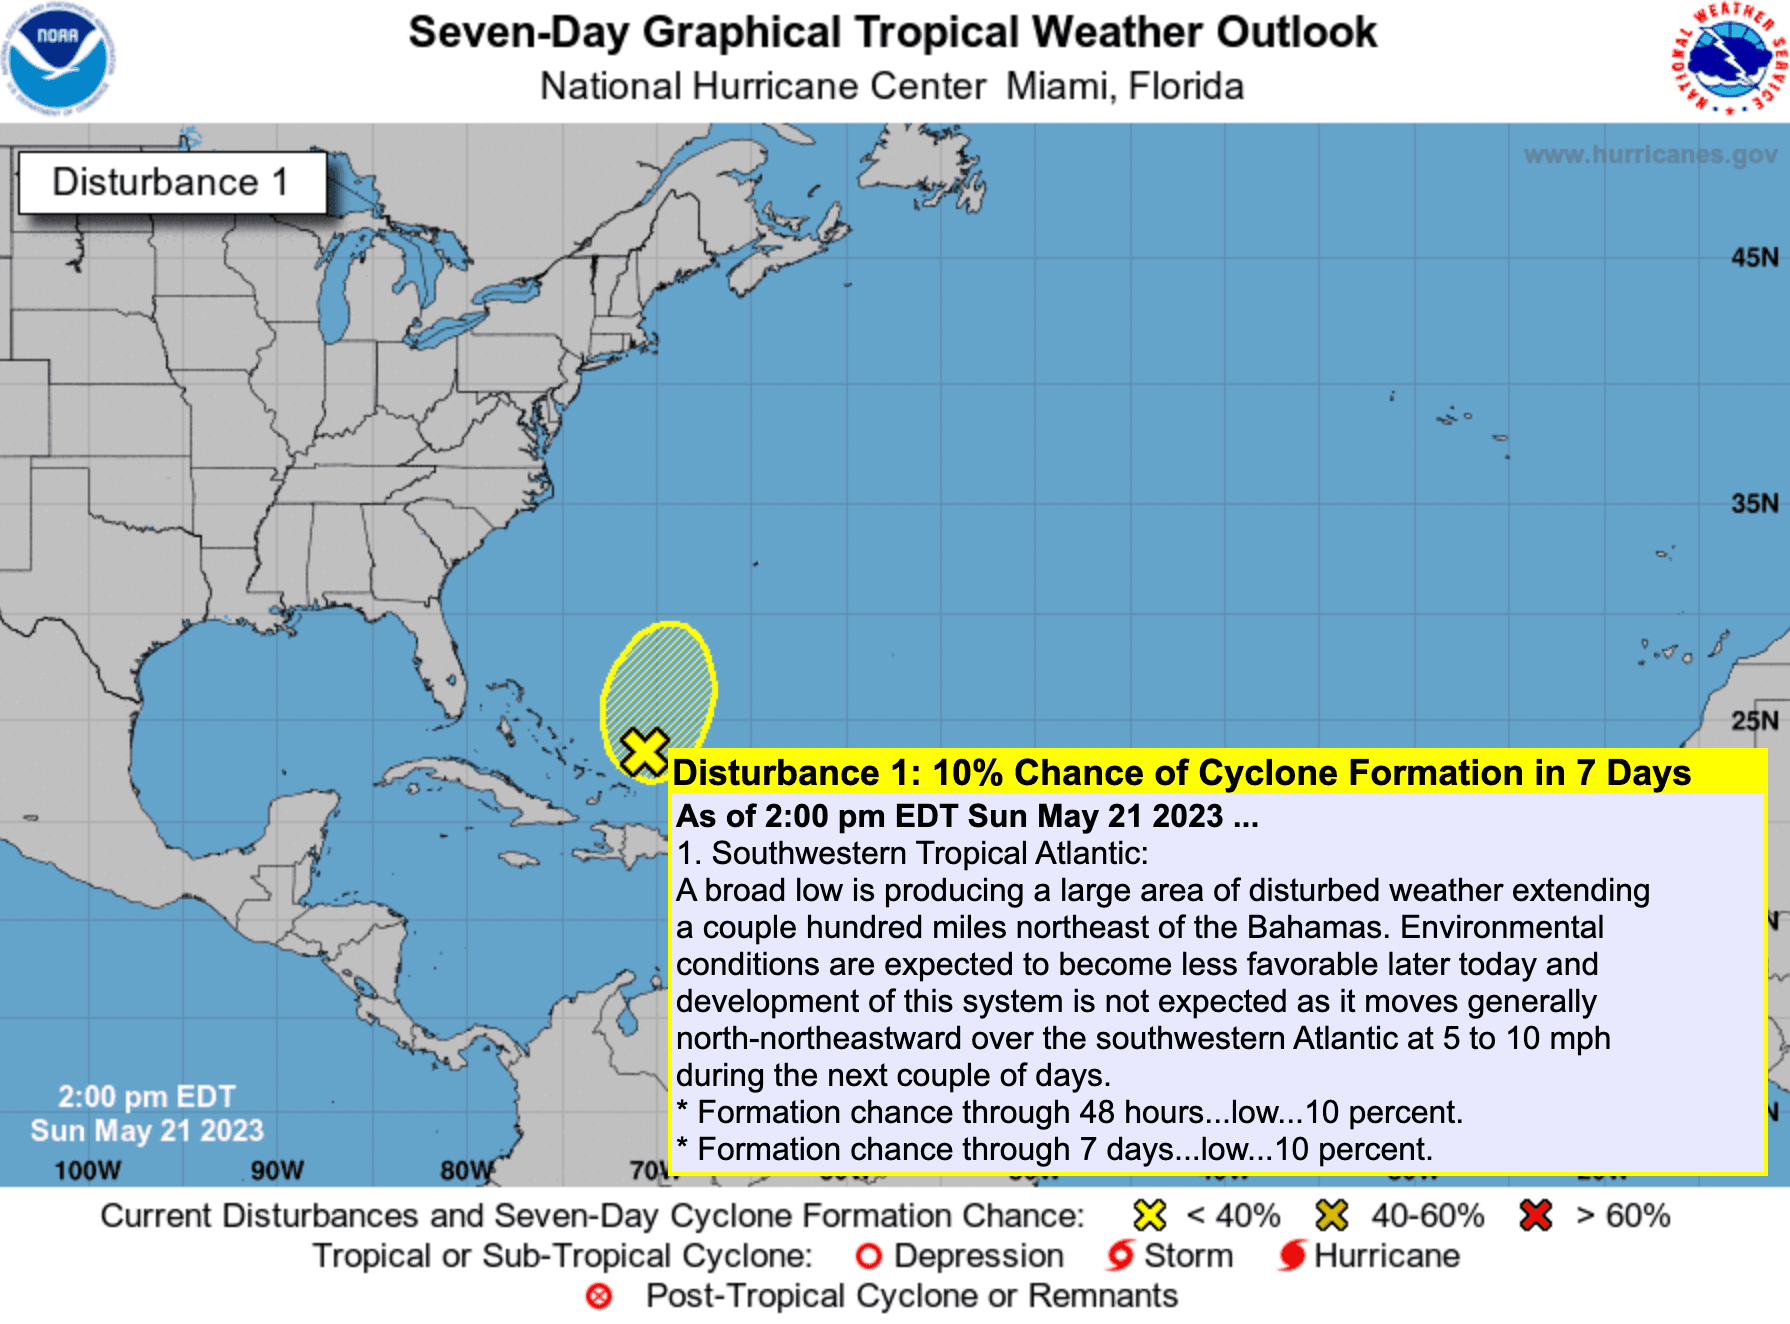 NHC 7-day tropical outlook